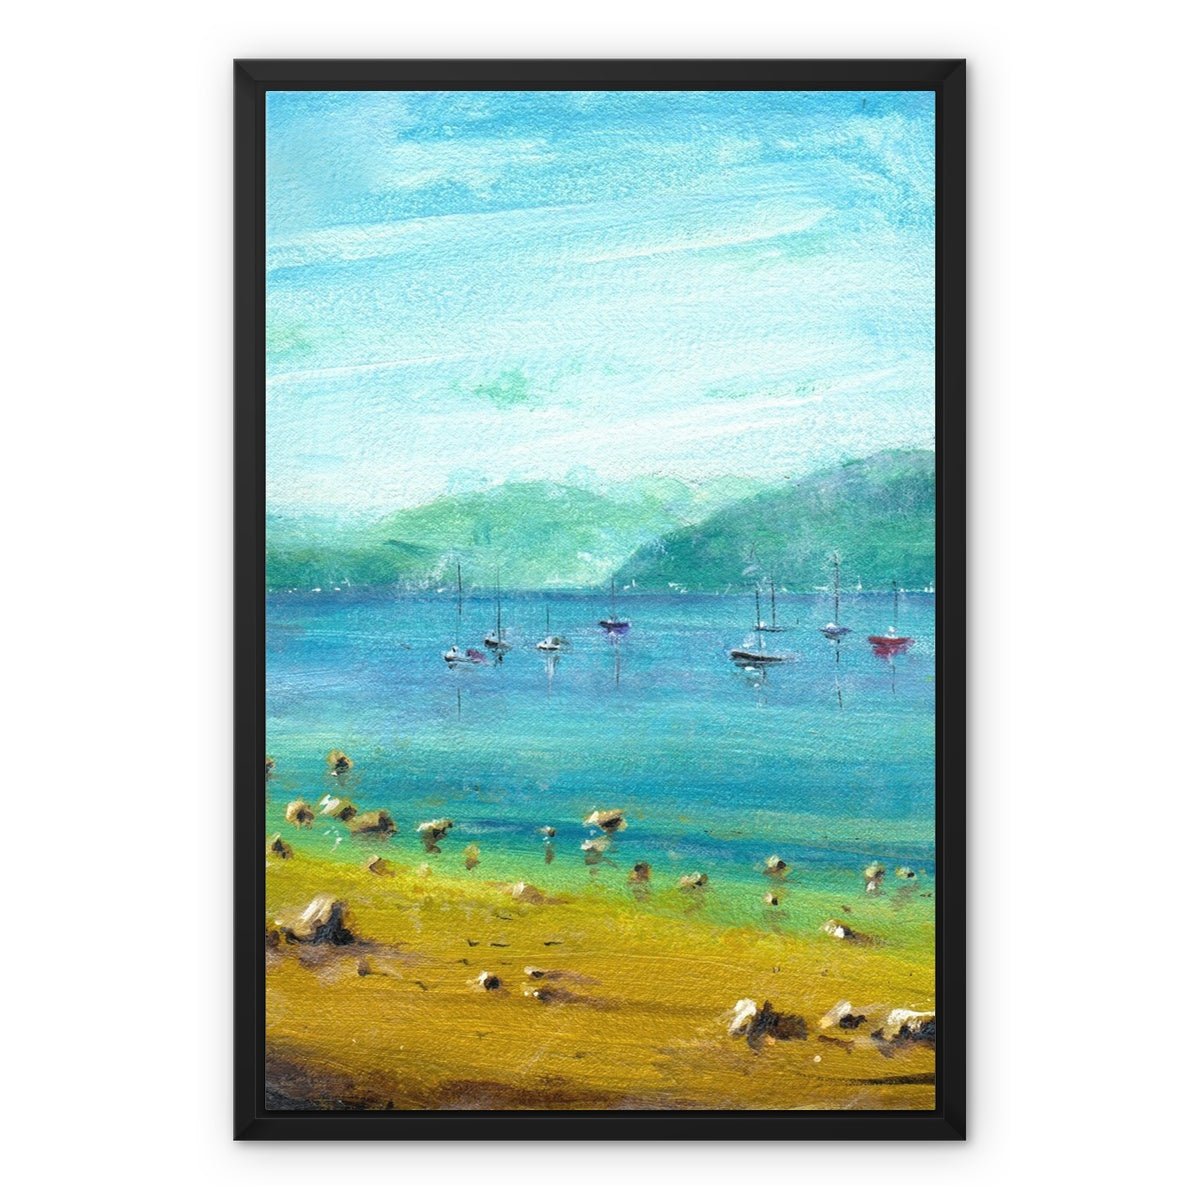 A Summer Day On The Clyde Painting | Framed Canvas From Scotland-Floating Framed Canvas Prints-River Clyde Art Gallery-18"x24"-Black Frame-Paintings, Prints, Homeware, Art Gifts From Scotland By Scottish Artist Kevin Hunter